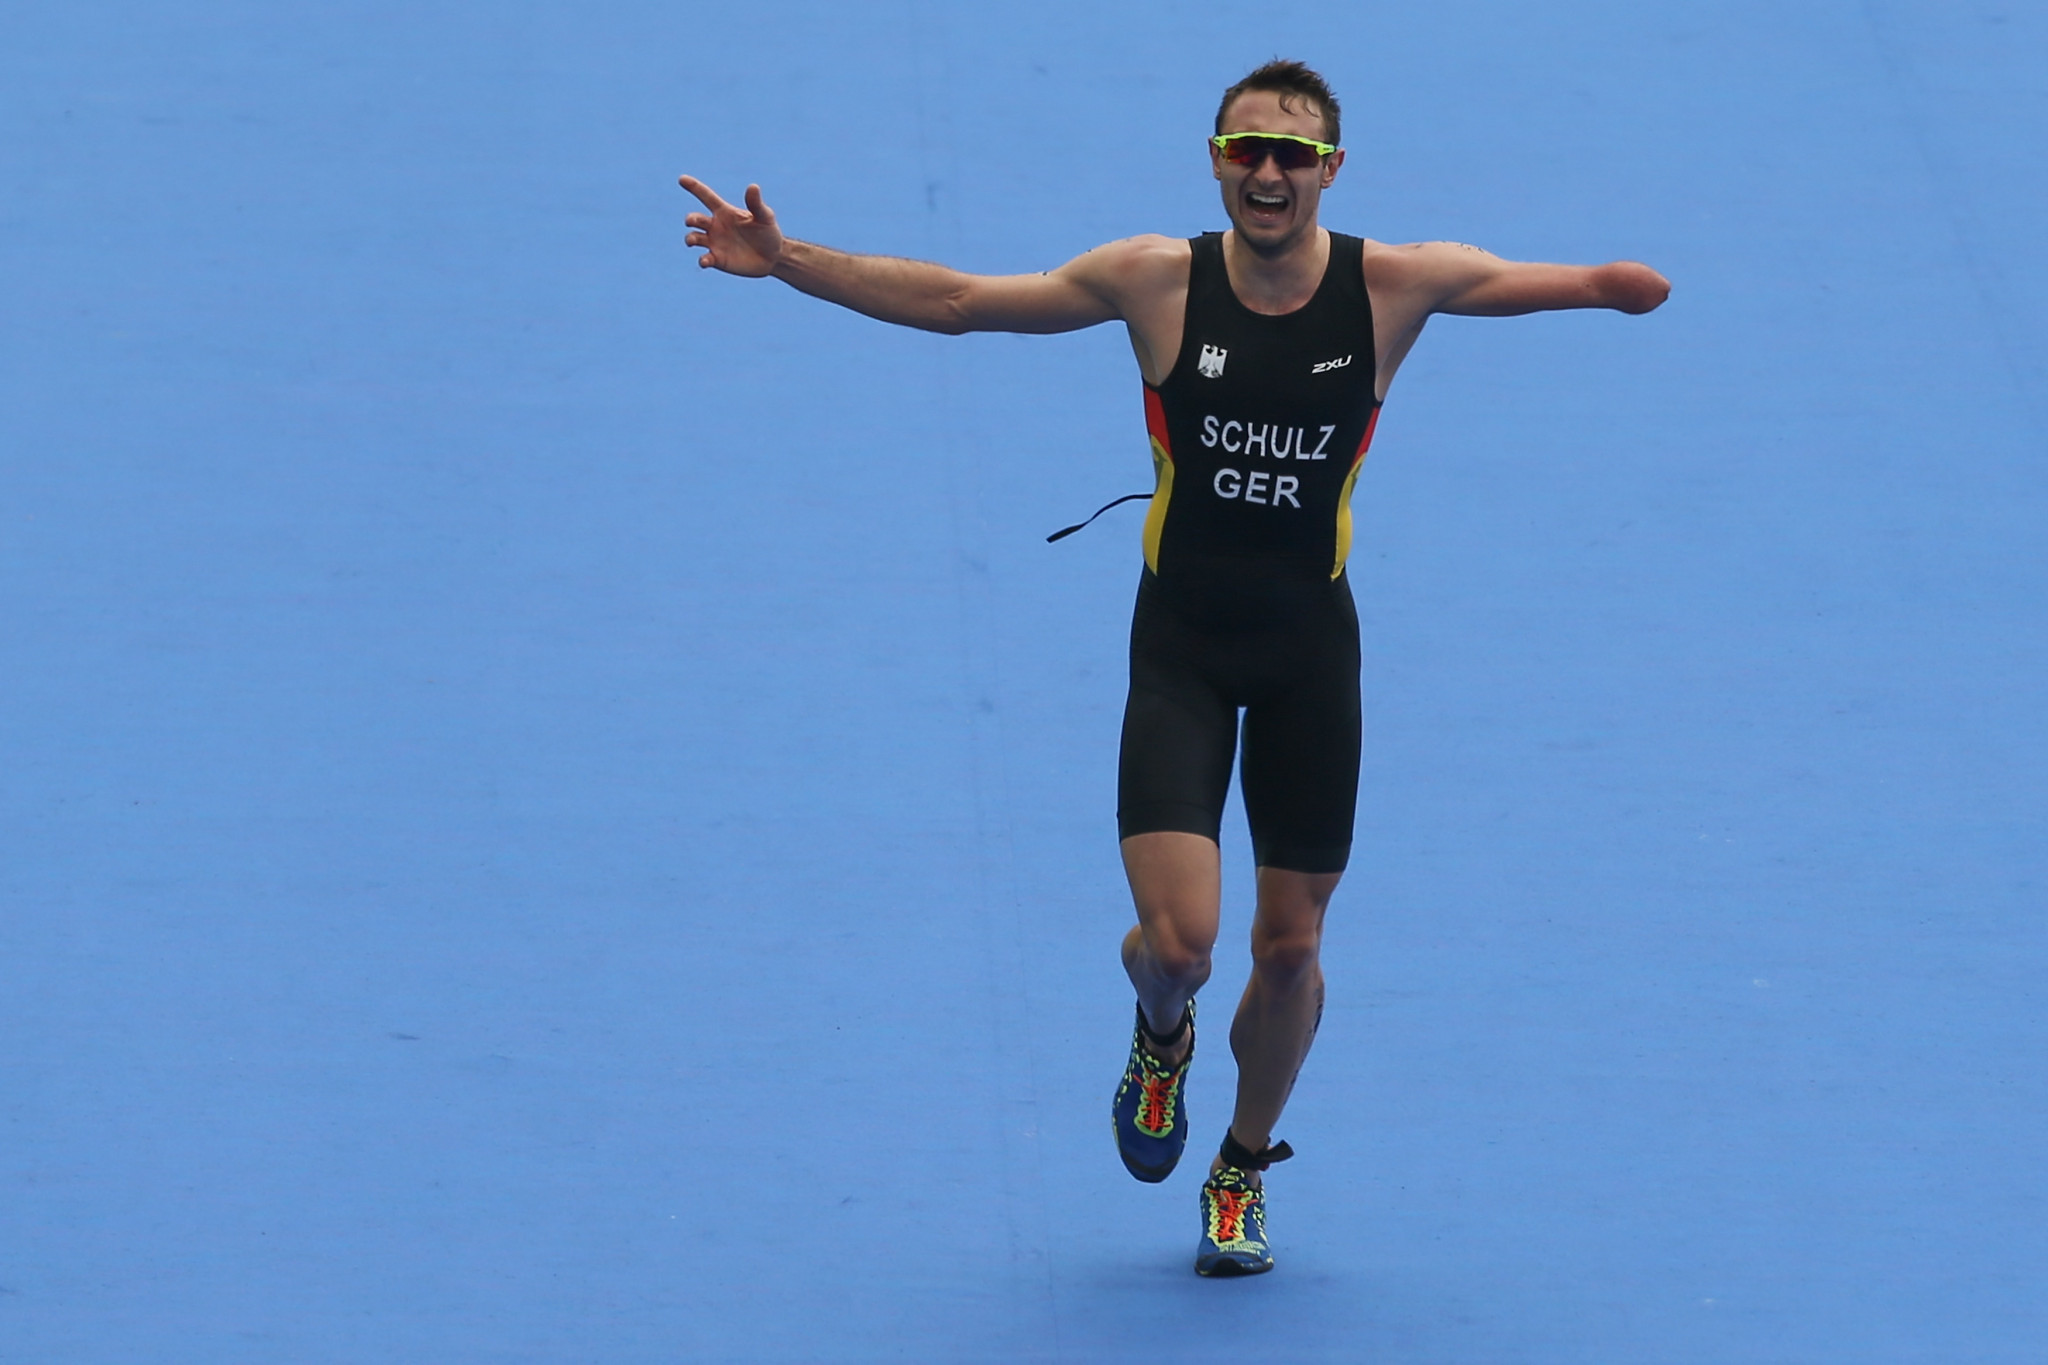 Germany's Schulz looking to continue good form at ITU Para-triathlon World Cup in Besancon